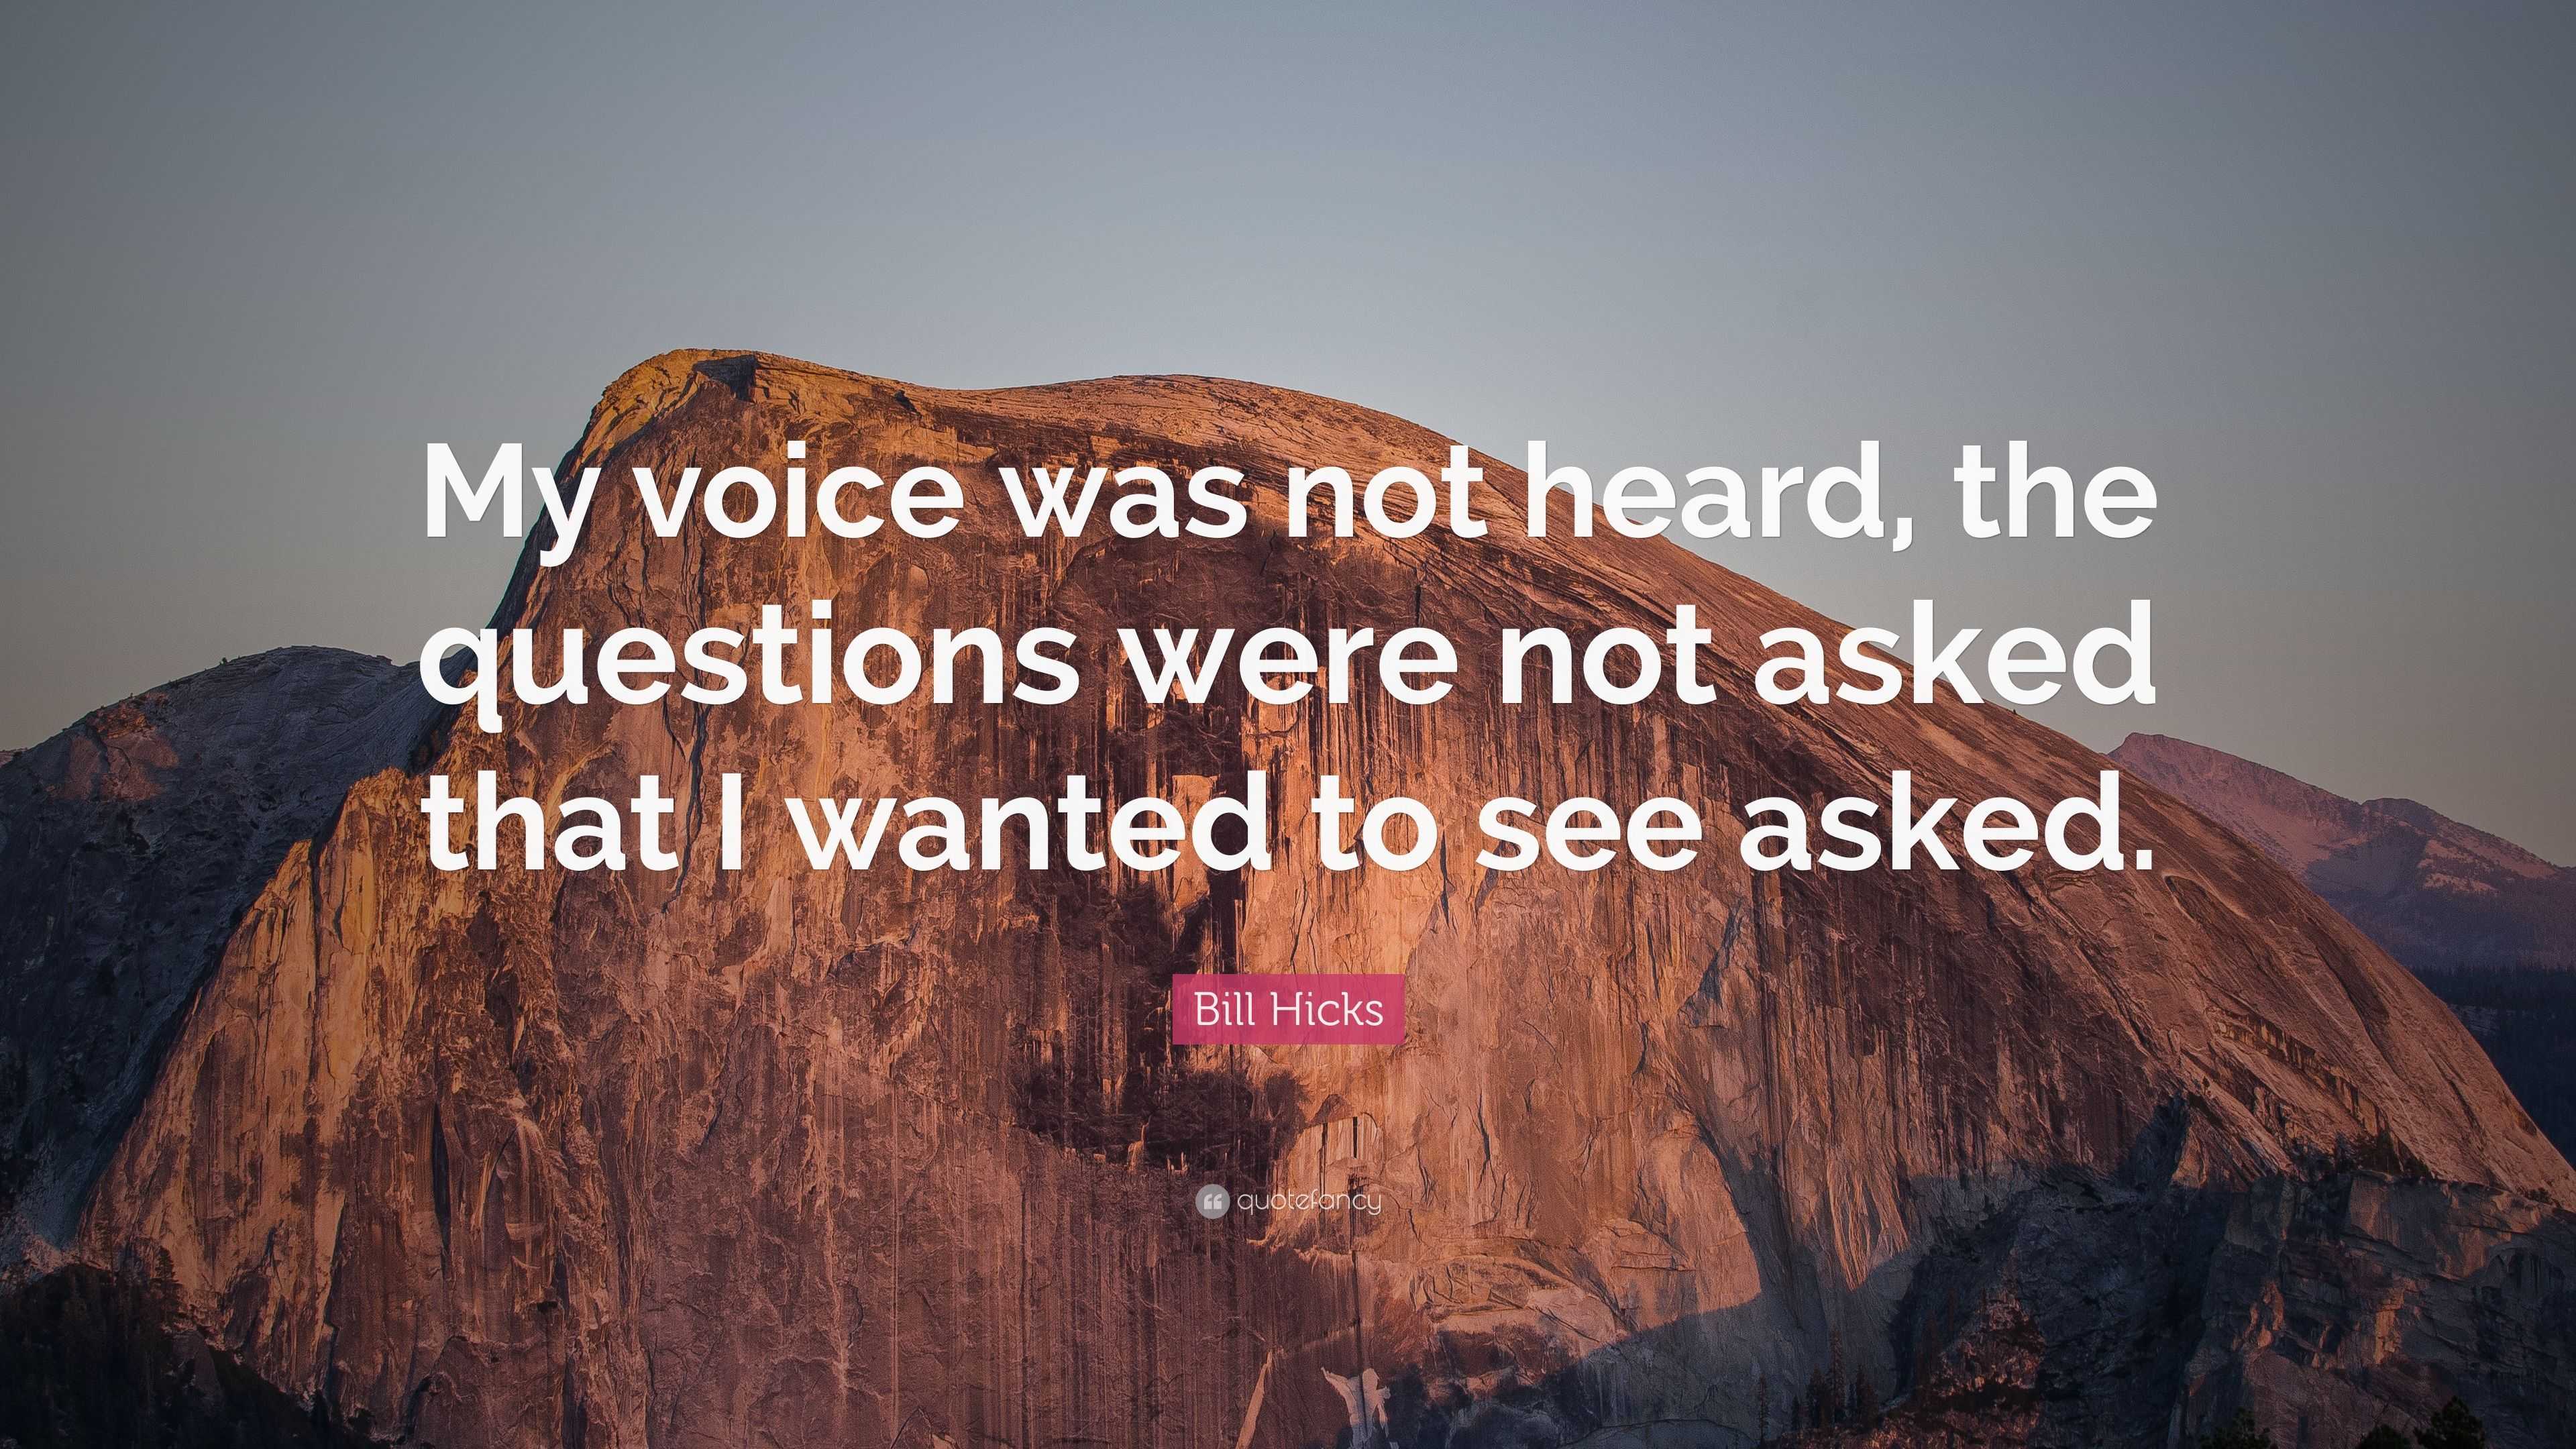 https://quotefancy.com/media/wallpaper/3840x2160/5081189-Bill-Hicks-Quote-My-voice-was-not-heard-the-questions-were-not.jpg